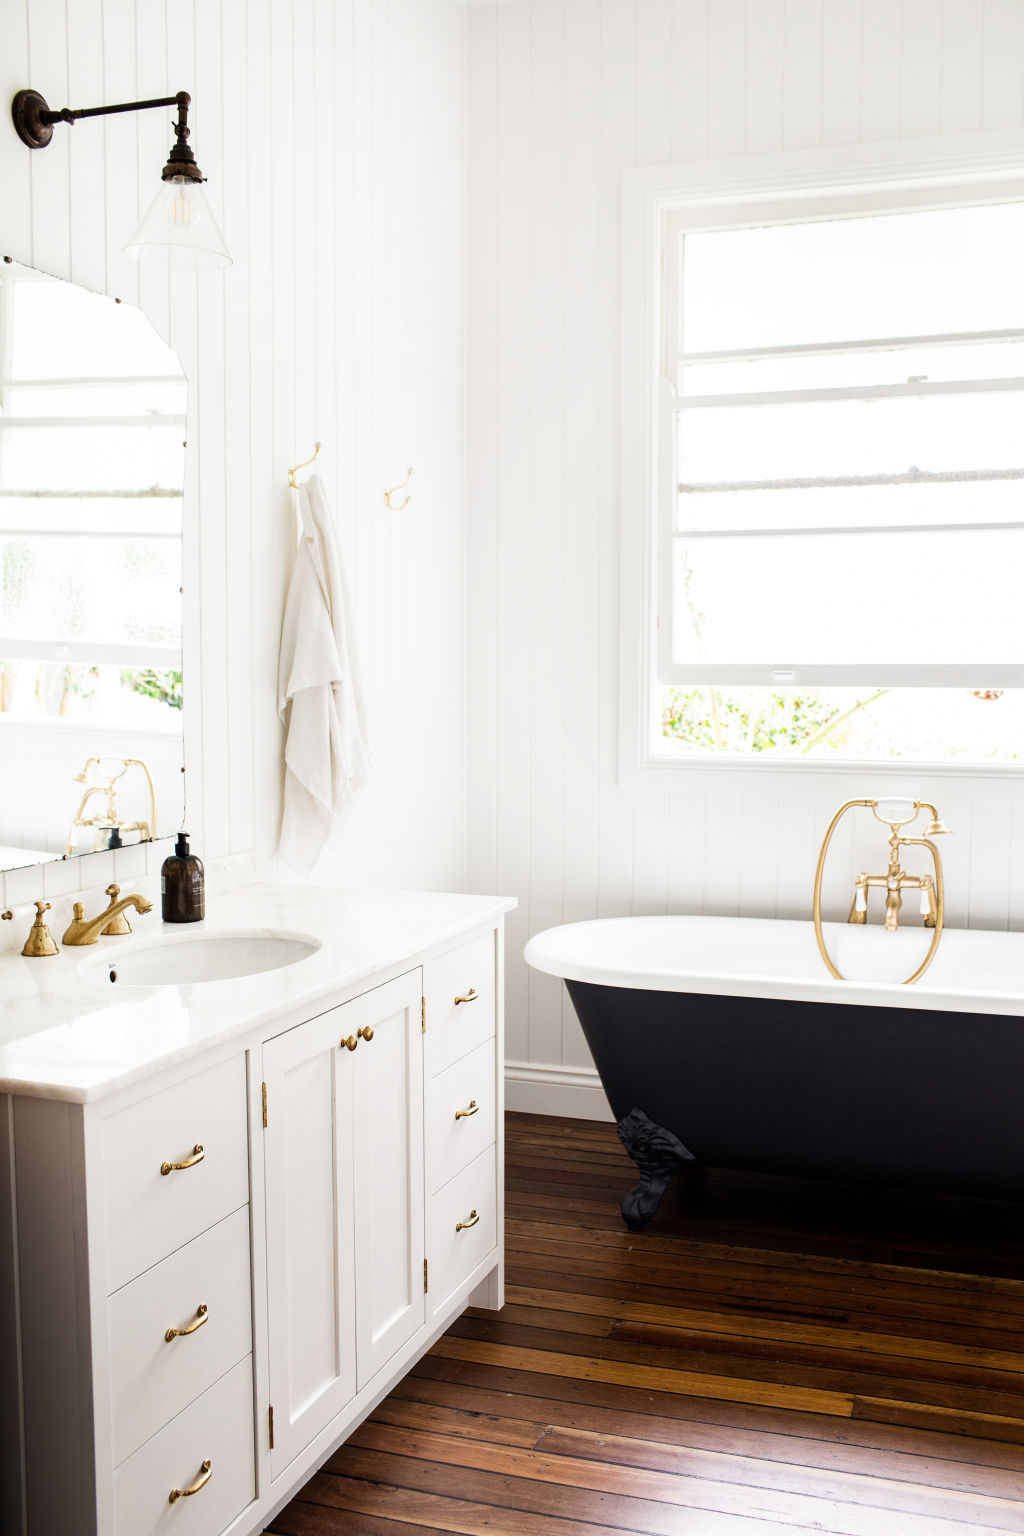 The Victoria + Albert Cheshire bathtub is one of the family’s favourite things in their Bangalow home. Photo: Kara Rosenlund